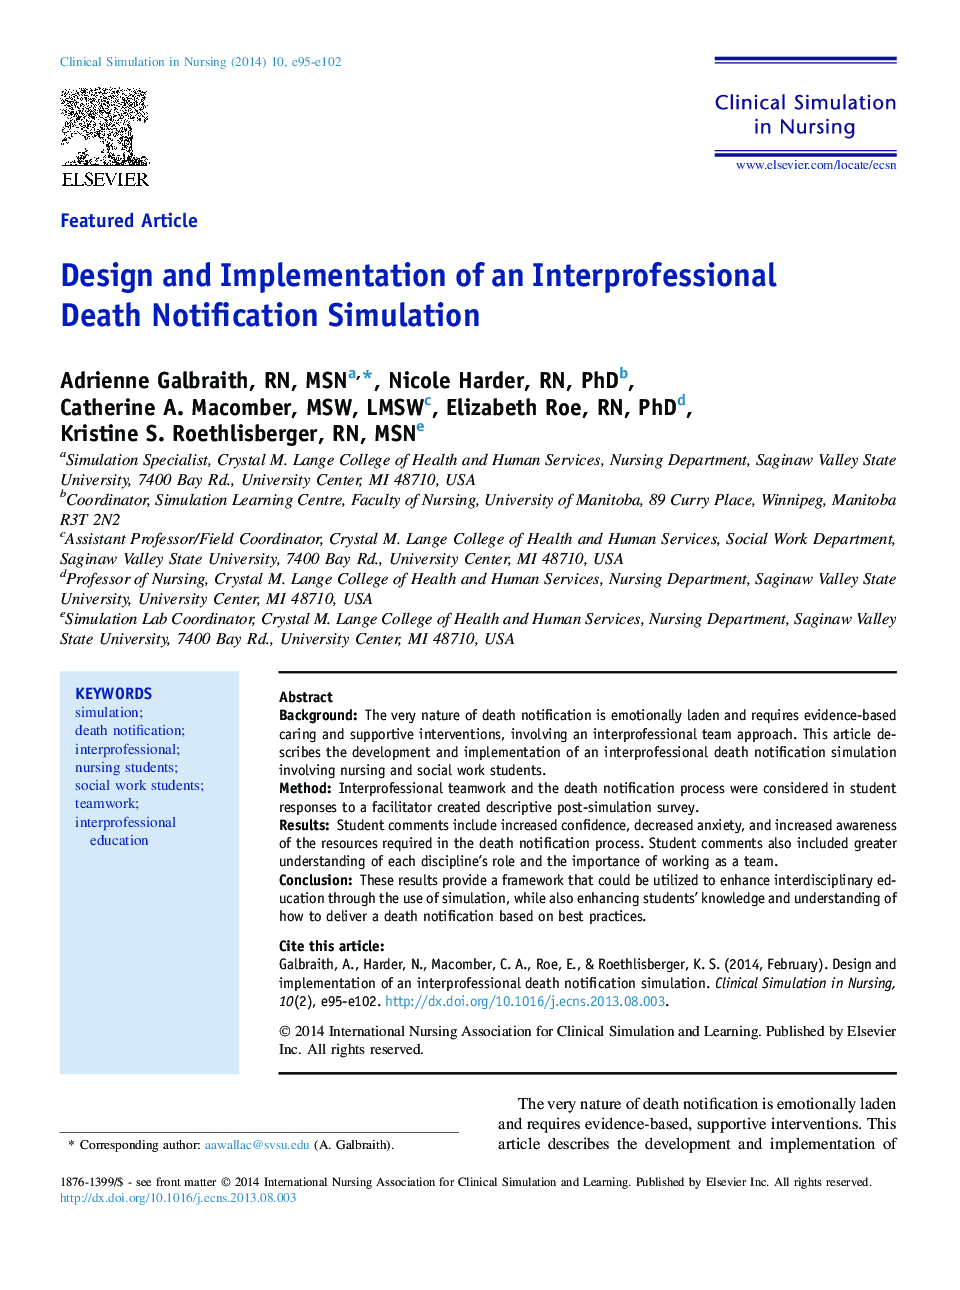 Design and Implementation of an Interprofessional Death Notification Simulation